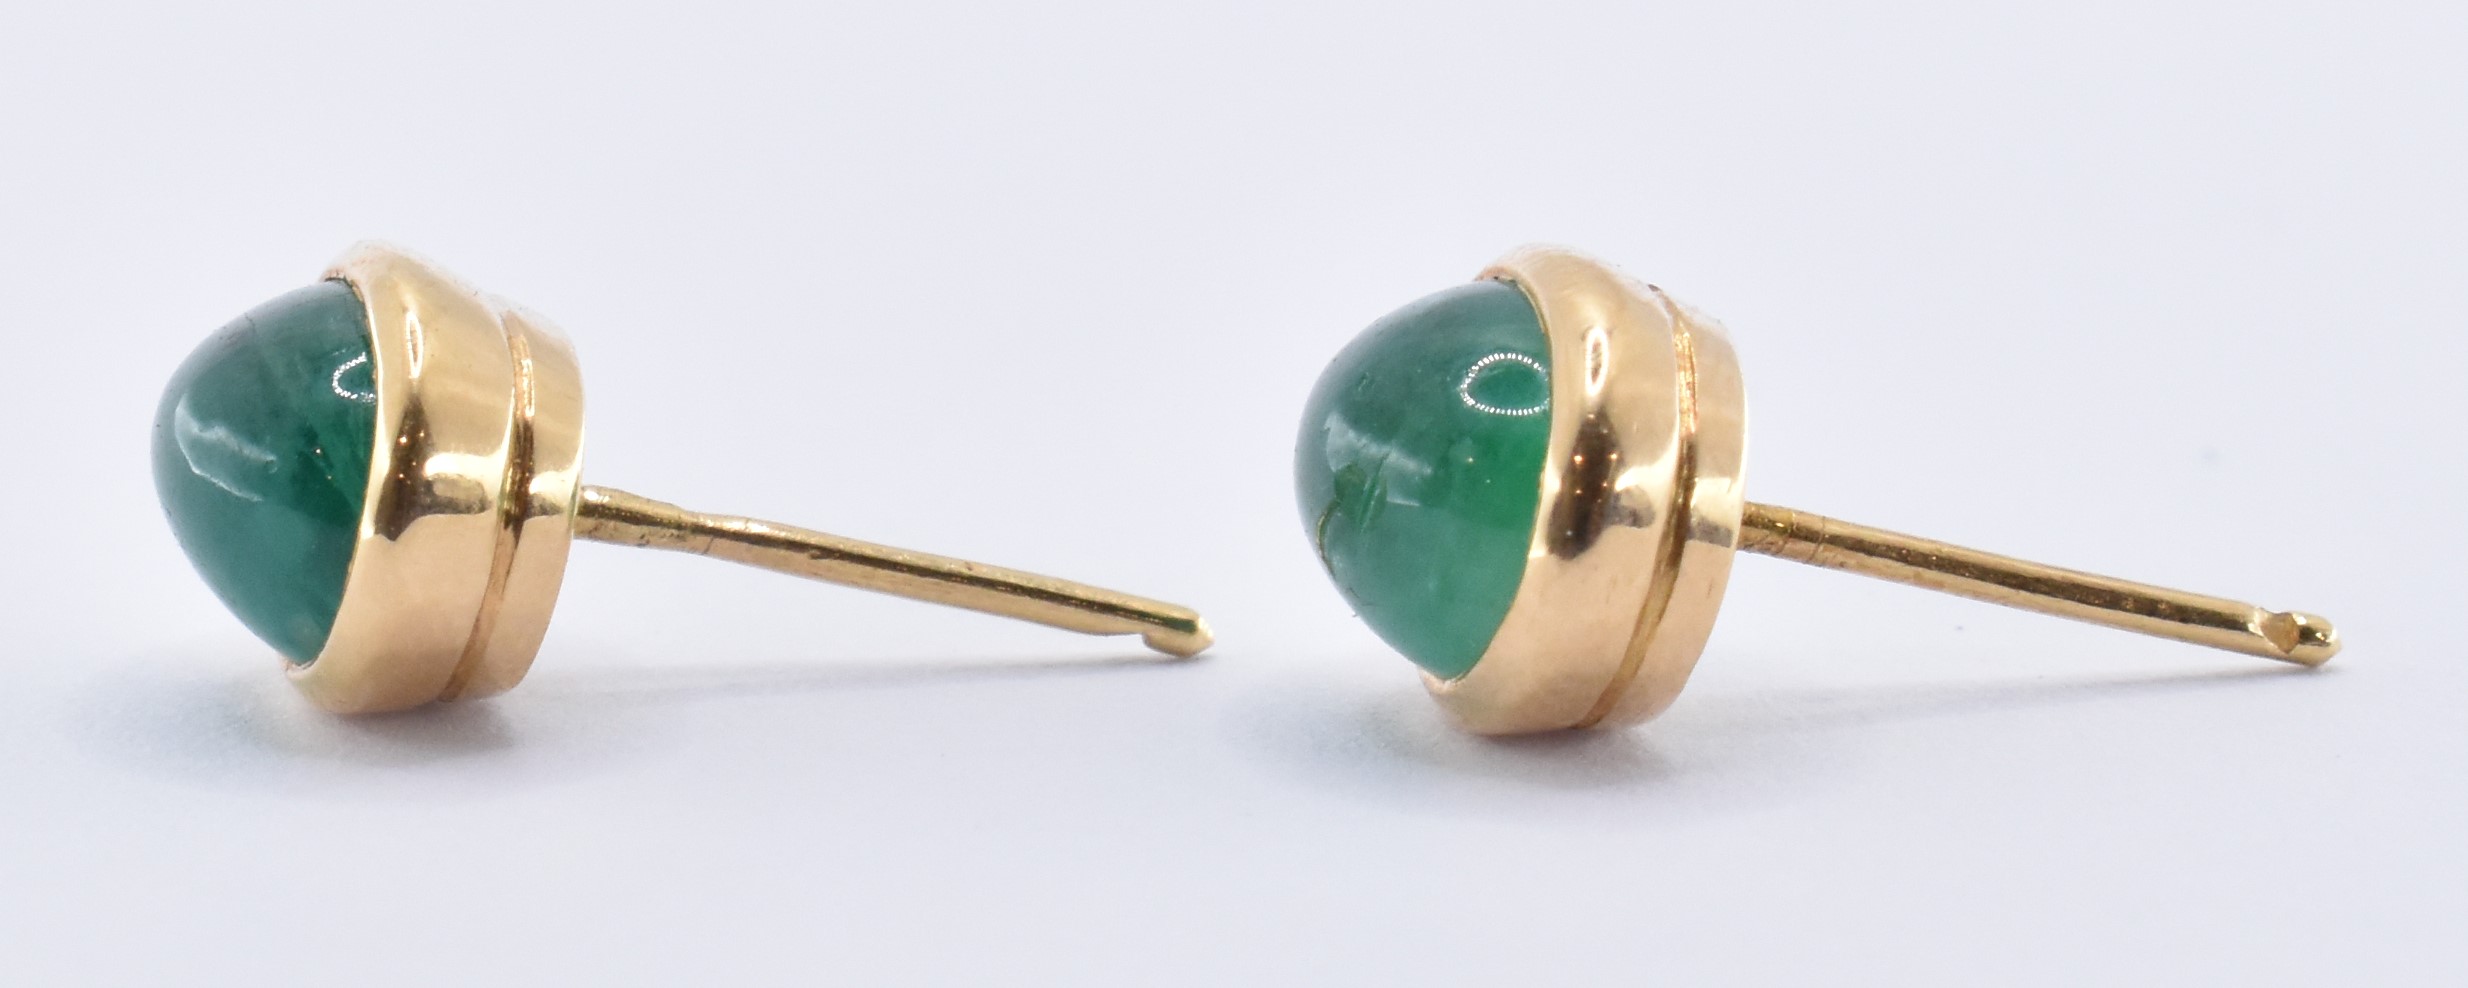 WITH DRAWN PAIR OF 18CT GOLD & EMERALD EARRINGS - Image 2 of 4